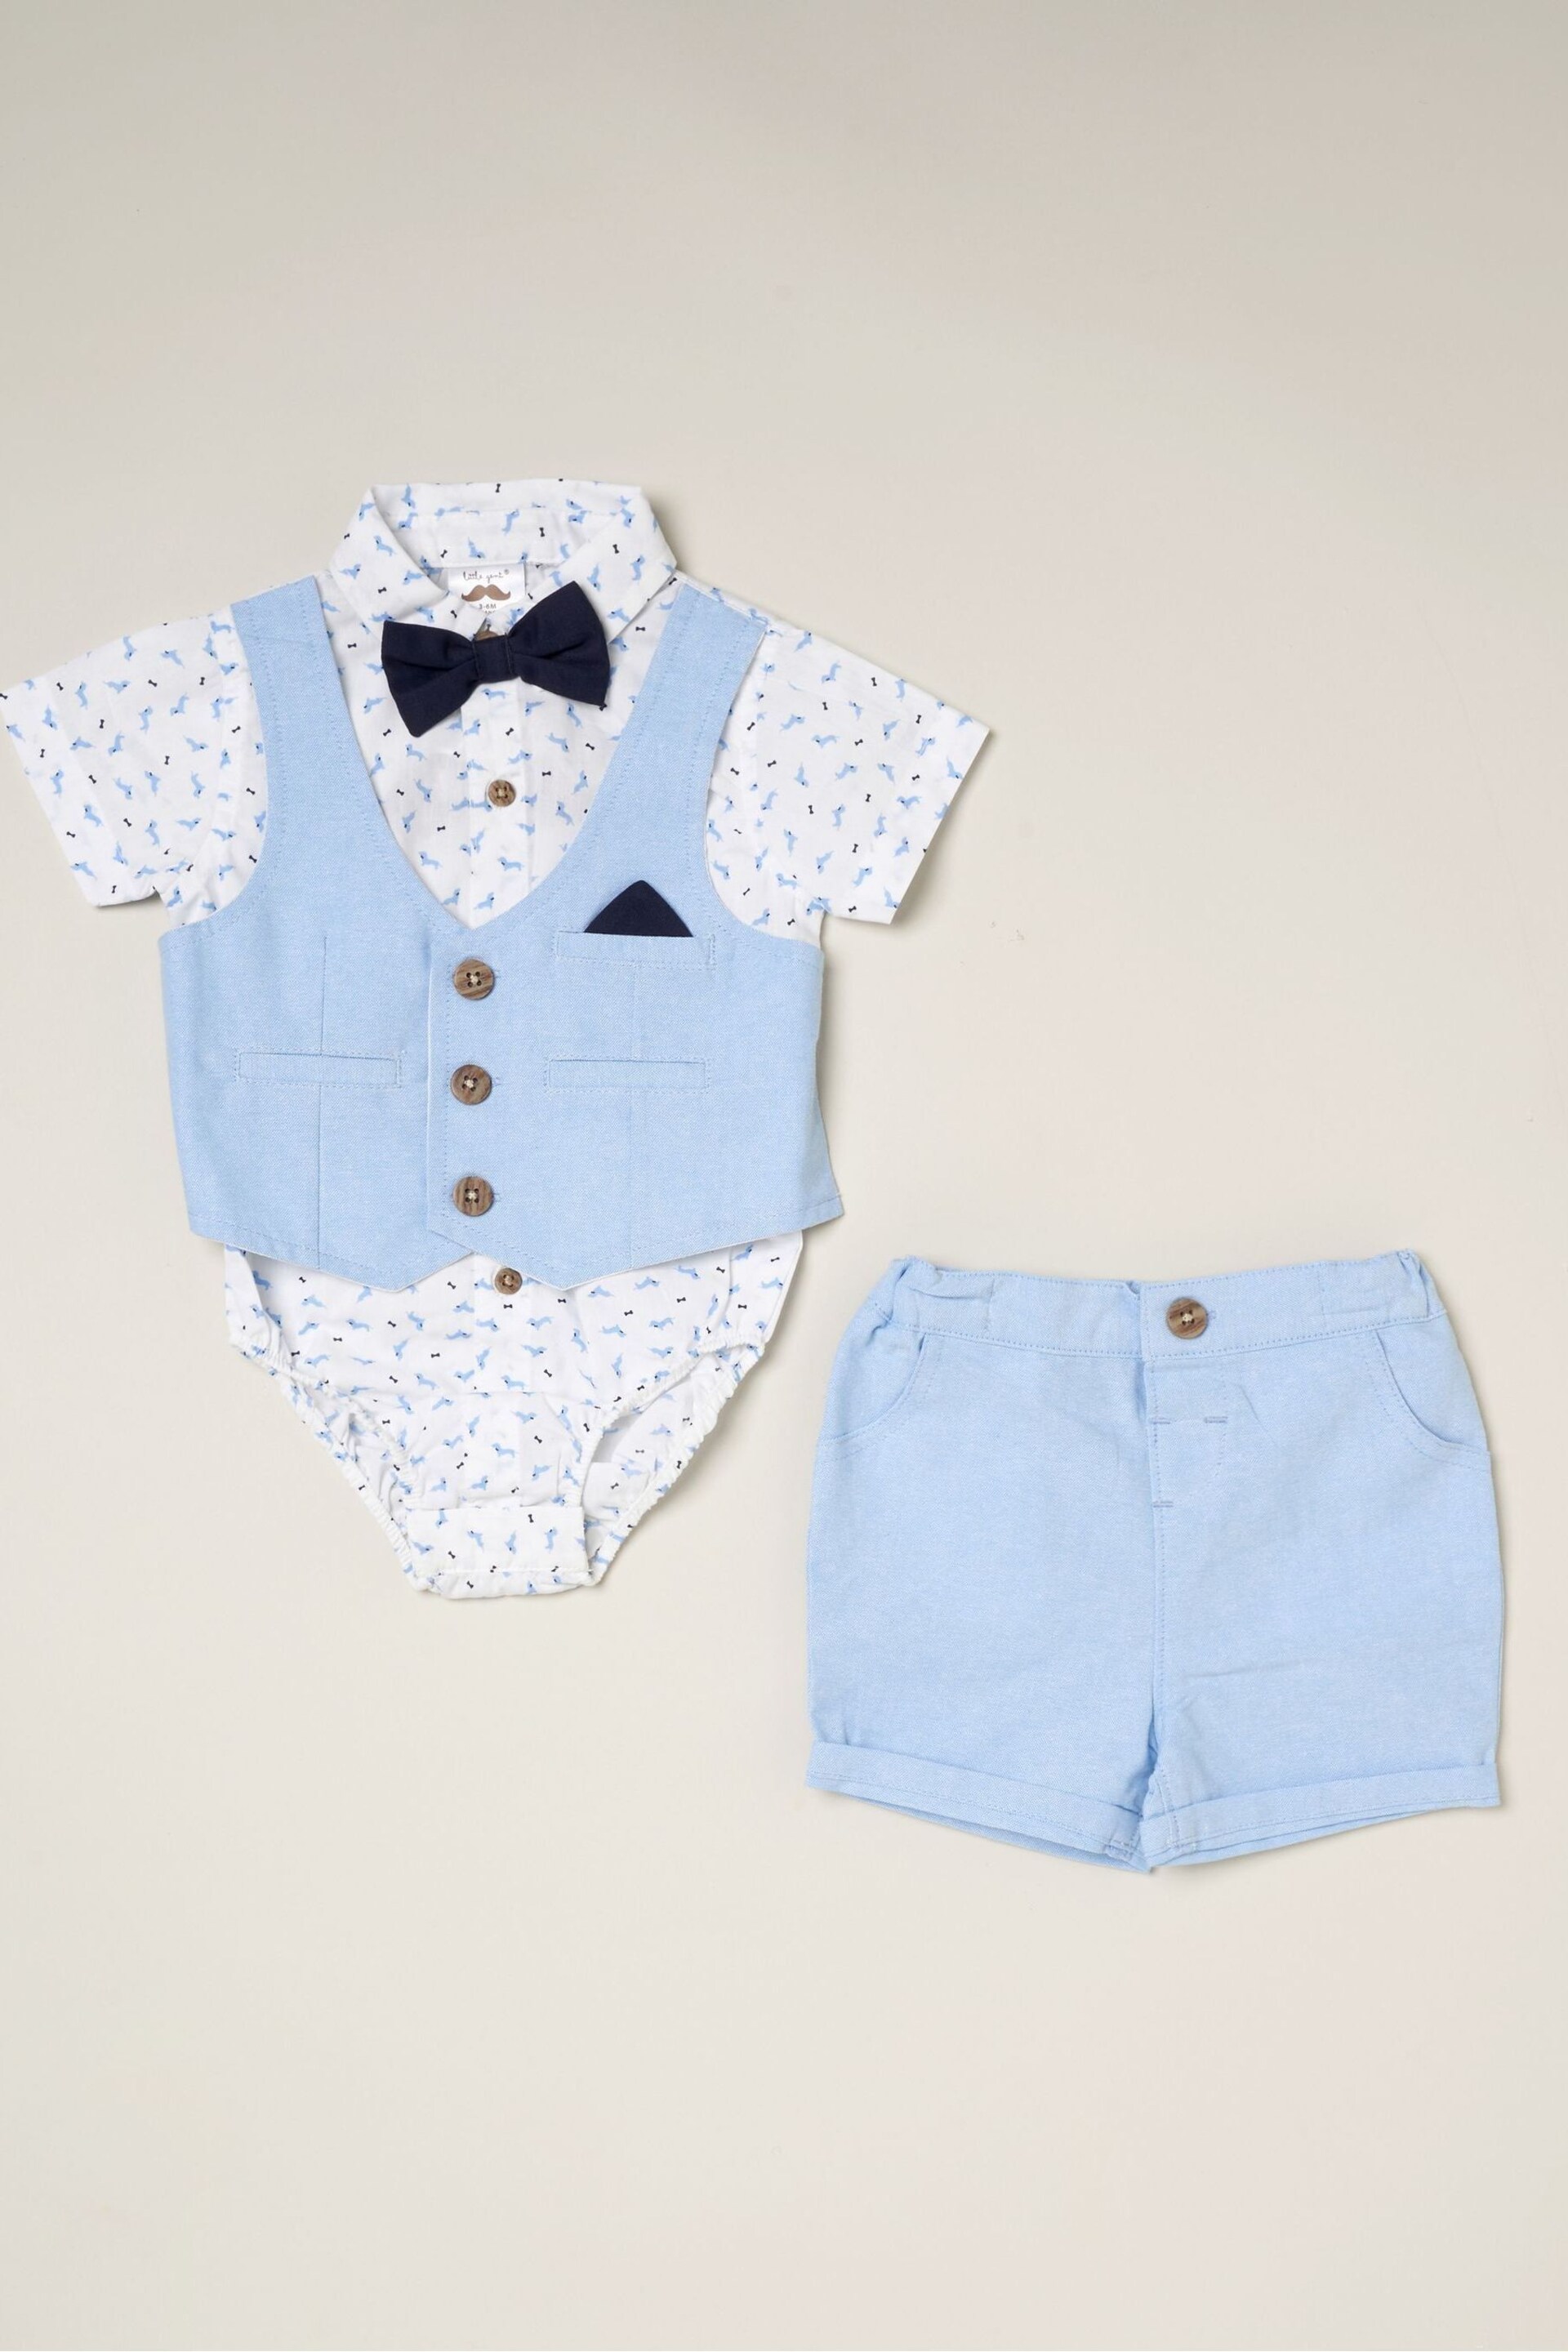 Little Gent Blue Shirt Style Bodysuit Shorts And Bowtie Outfit Set - Image 3 of 4